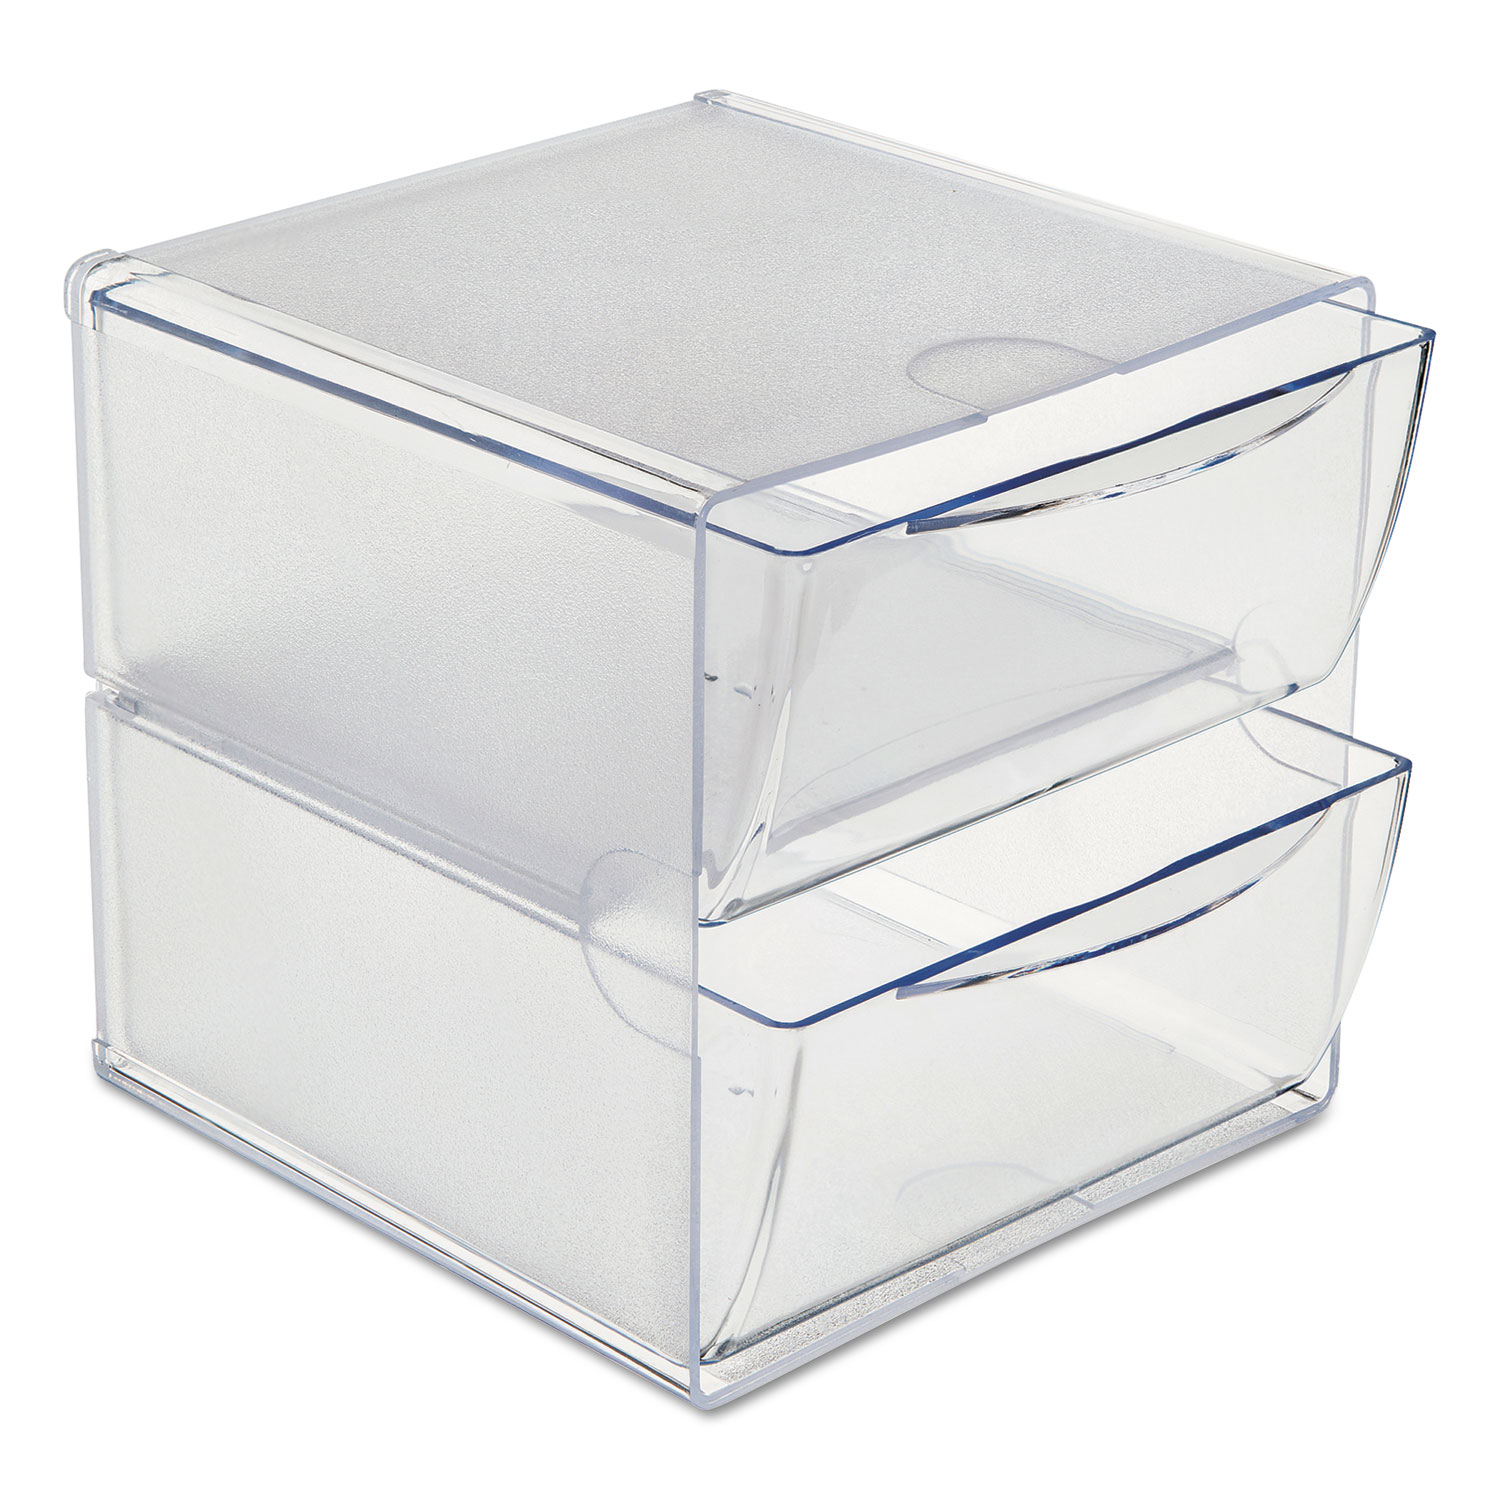 Stackable Cube Organizer, 2 Drawers, 6 x 7 1/8 x 6, Clear